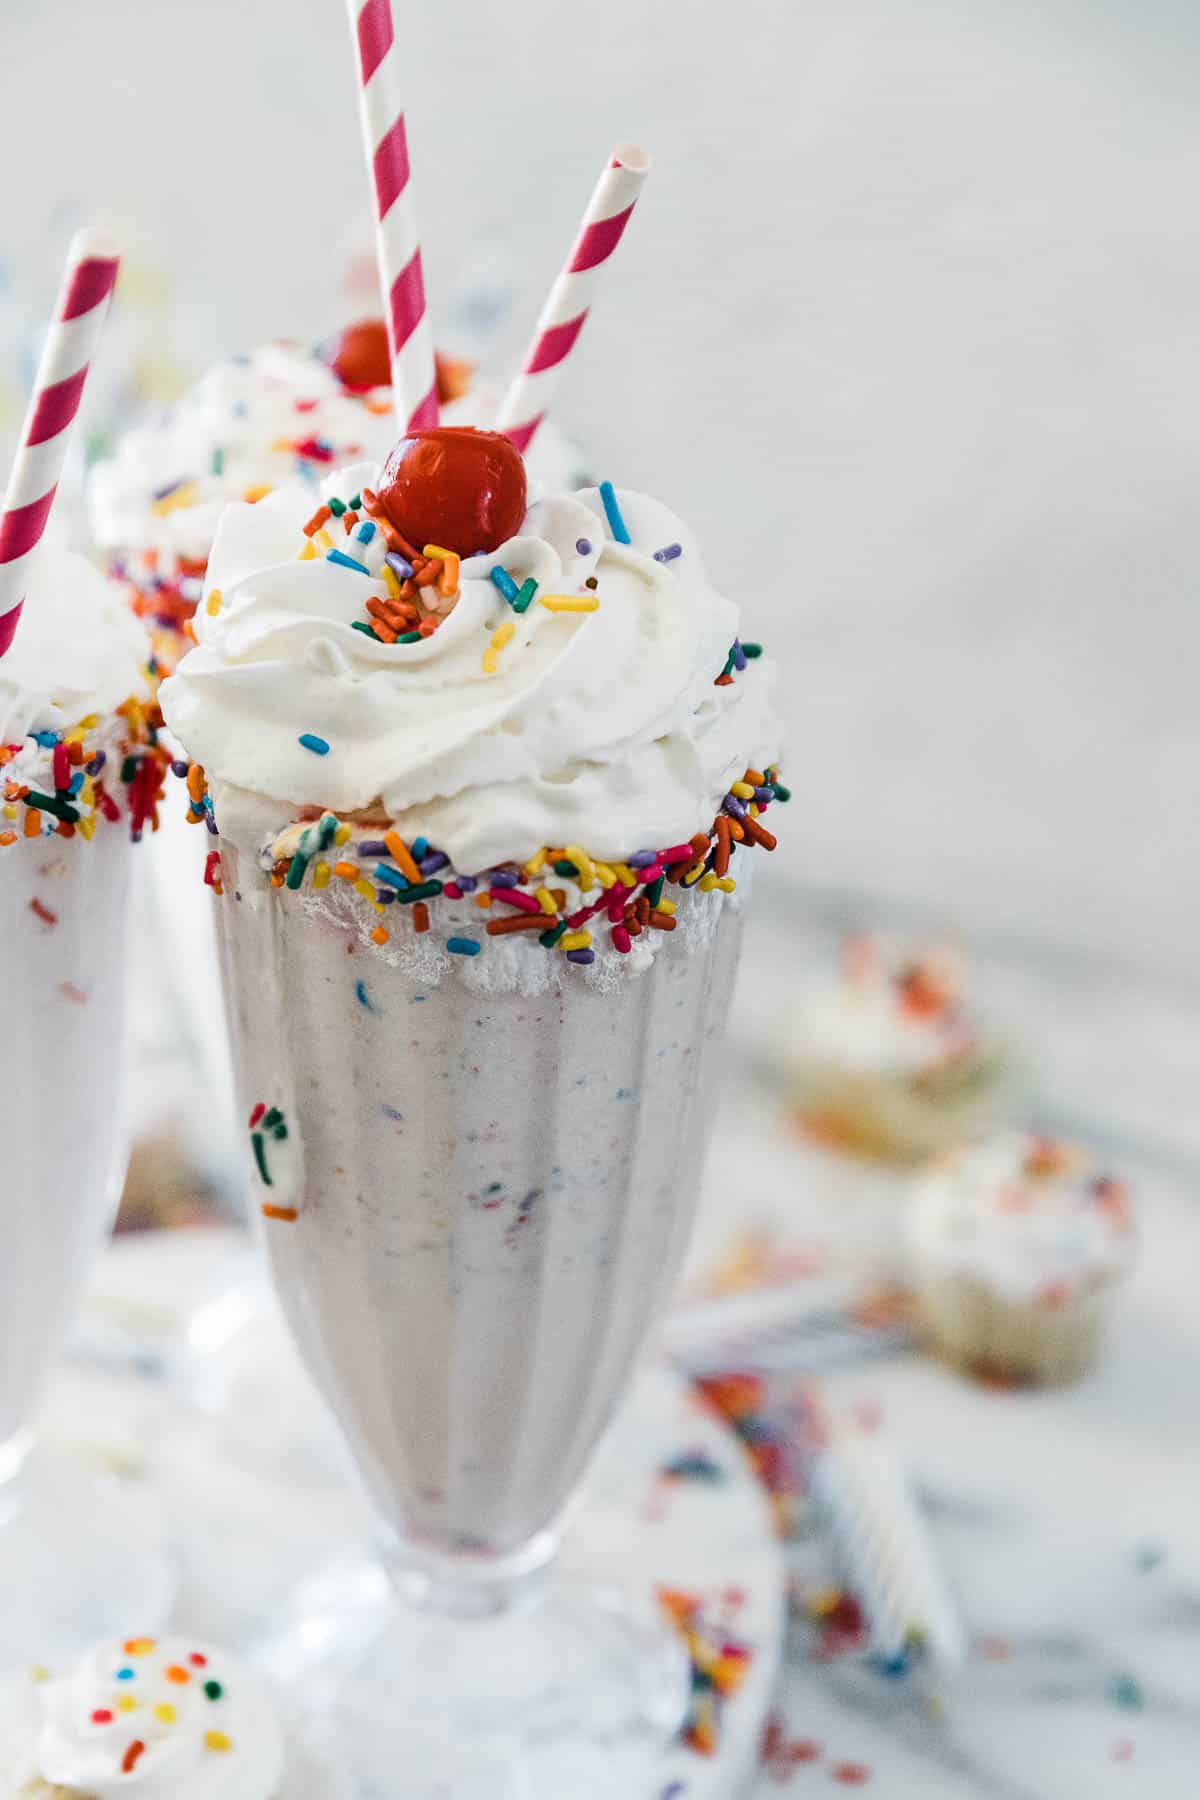 A half shot of cake shake in a Sunday glass rimmed with sprinkles.